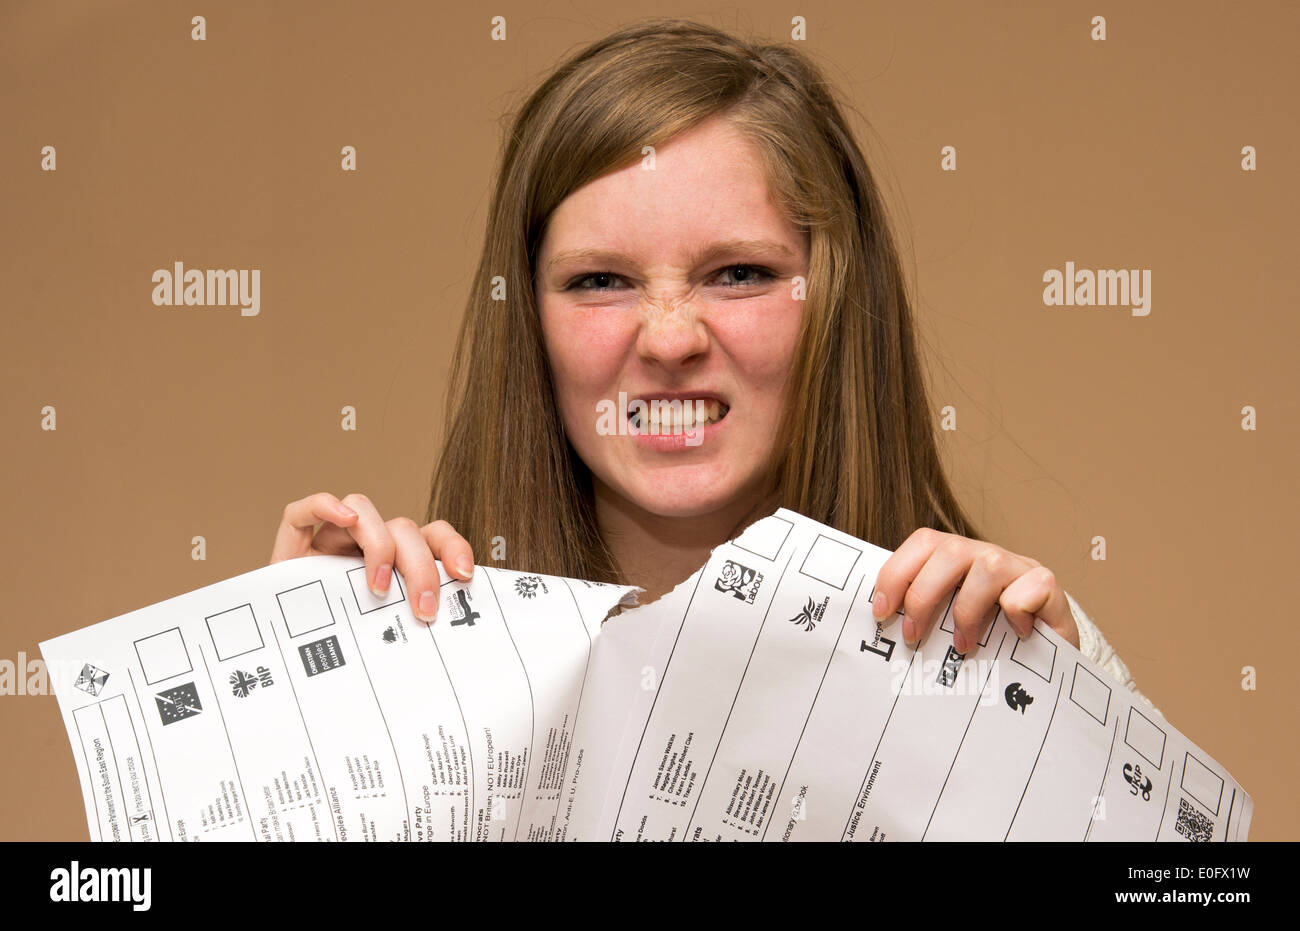 Angry young voting tearing ballot paper with spoiled voting paper Stock Photo